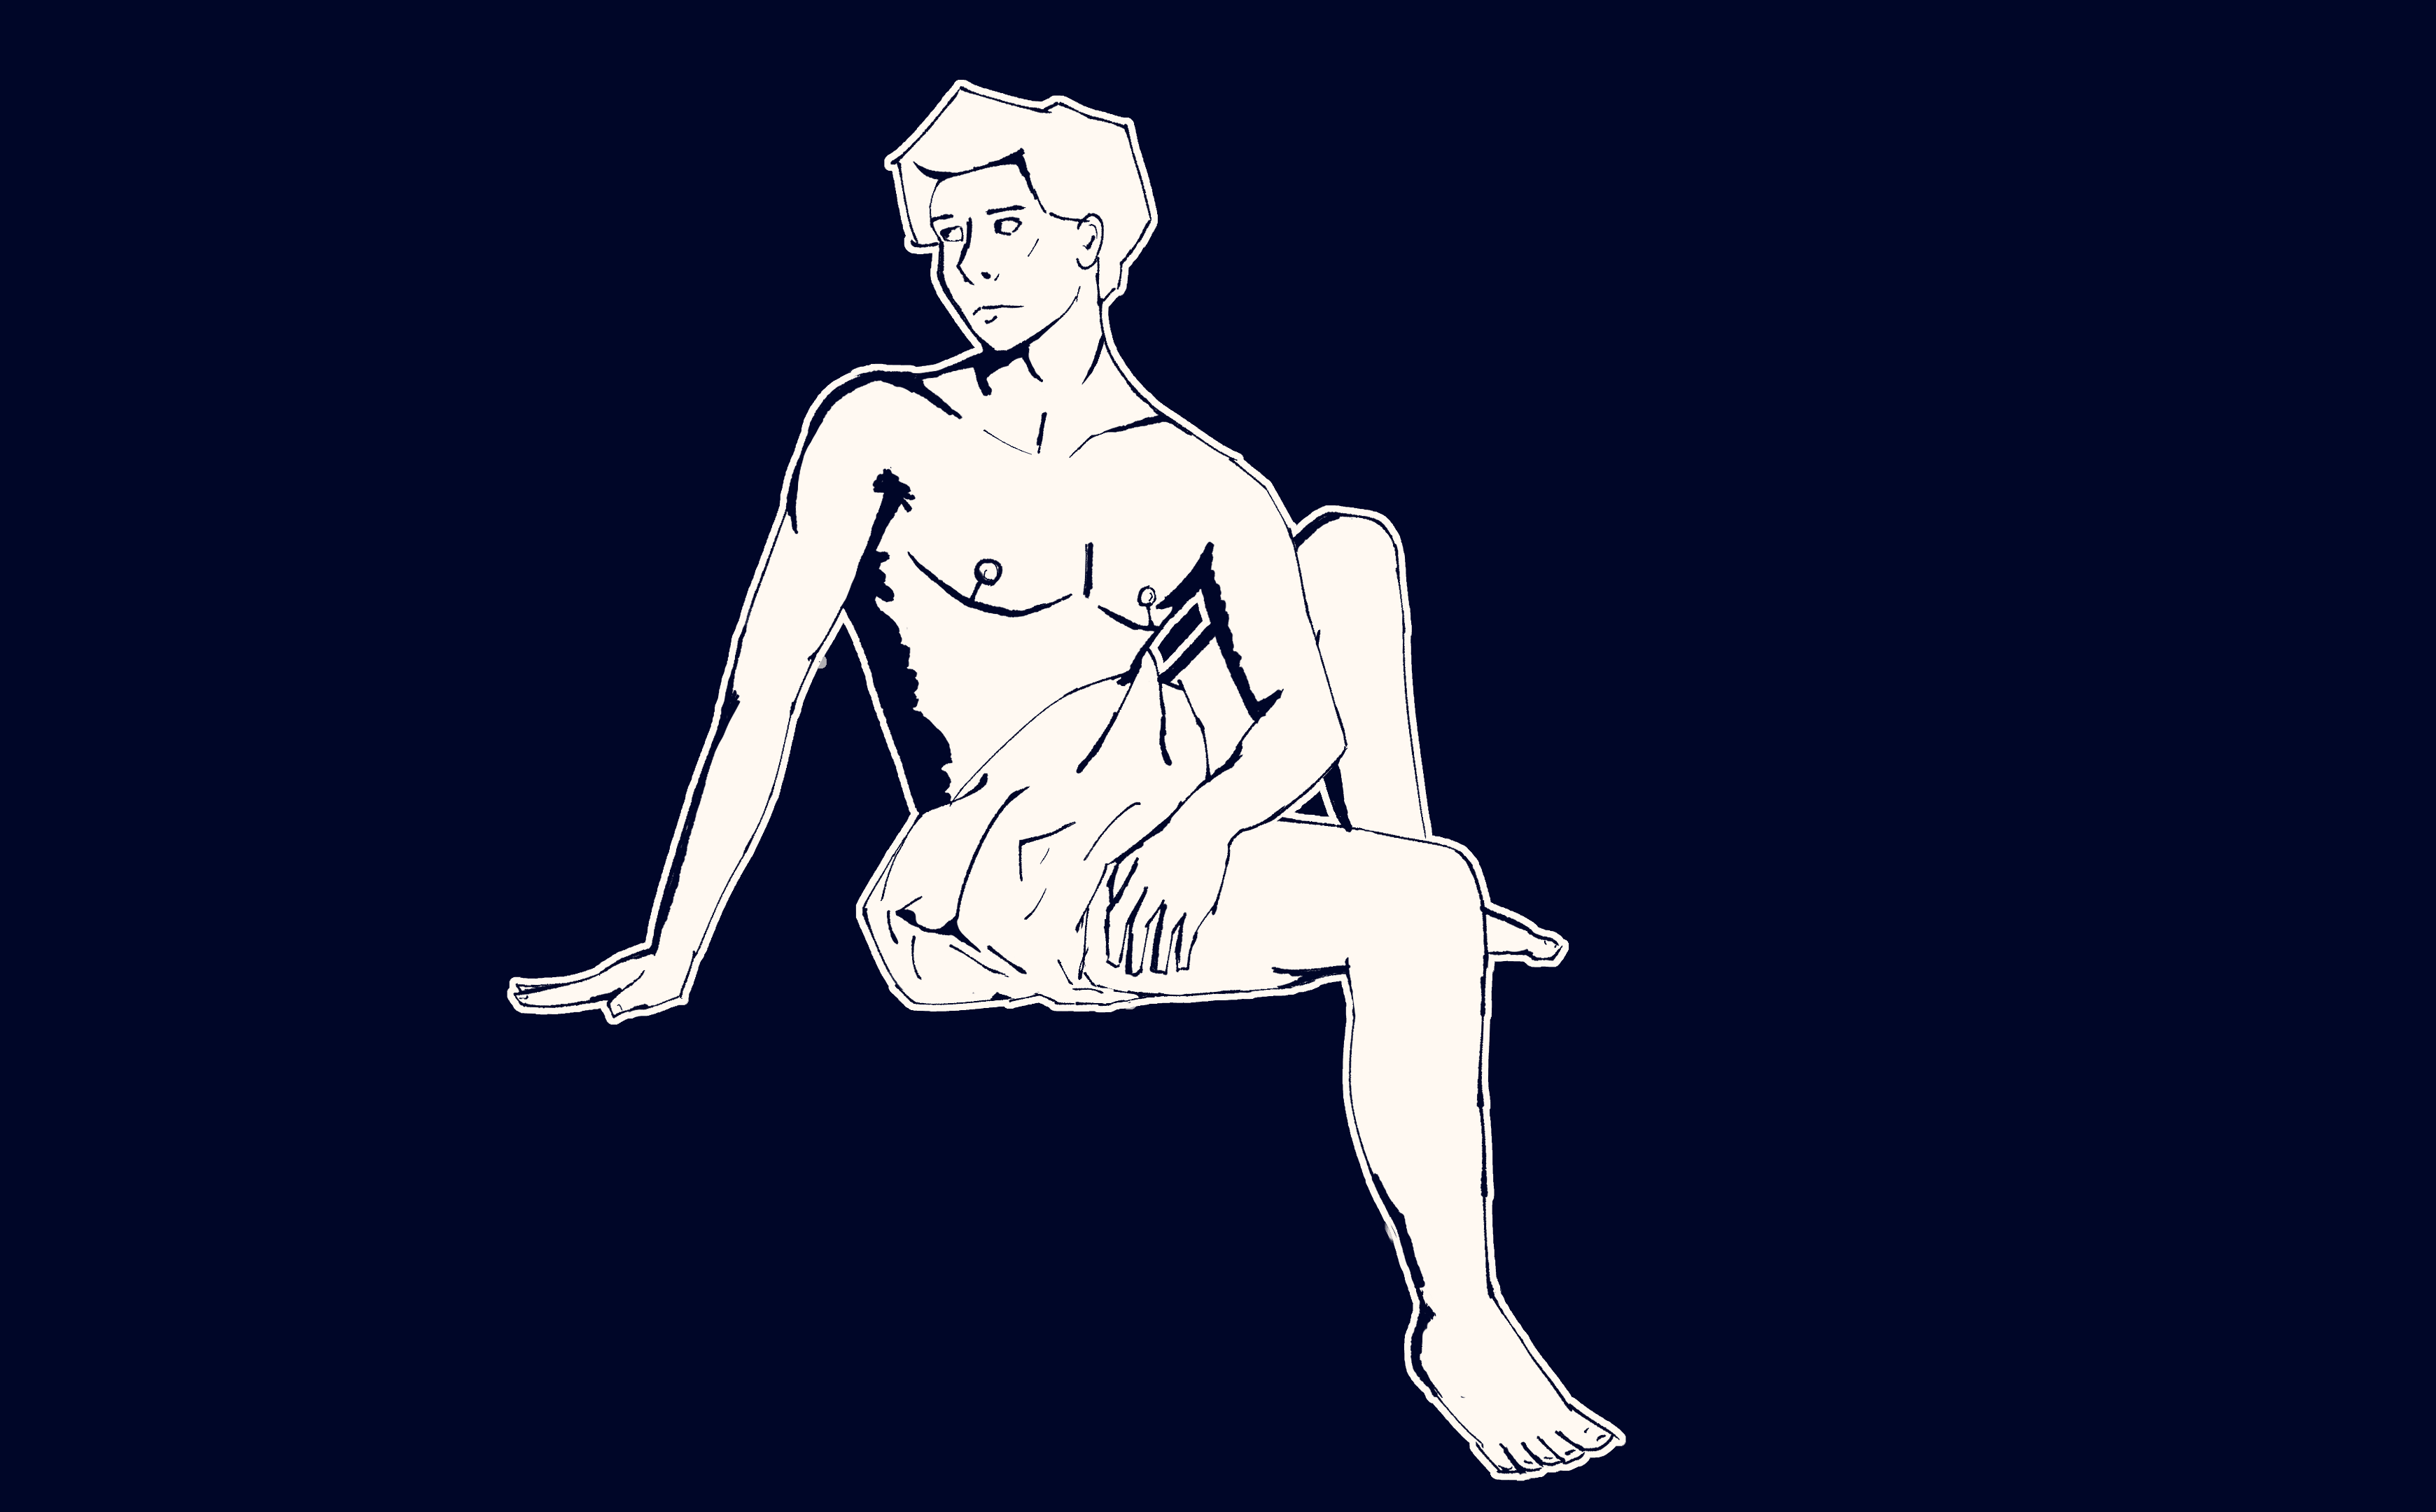 A digital drawing of a trans man sitting against a solid blue background, the style somewhat emulates a linoprint